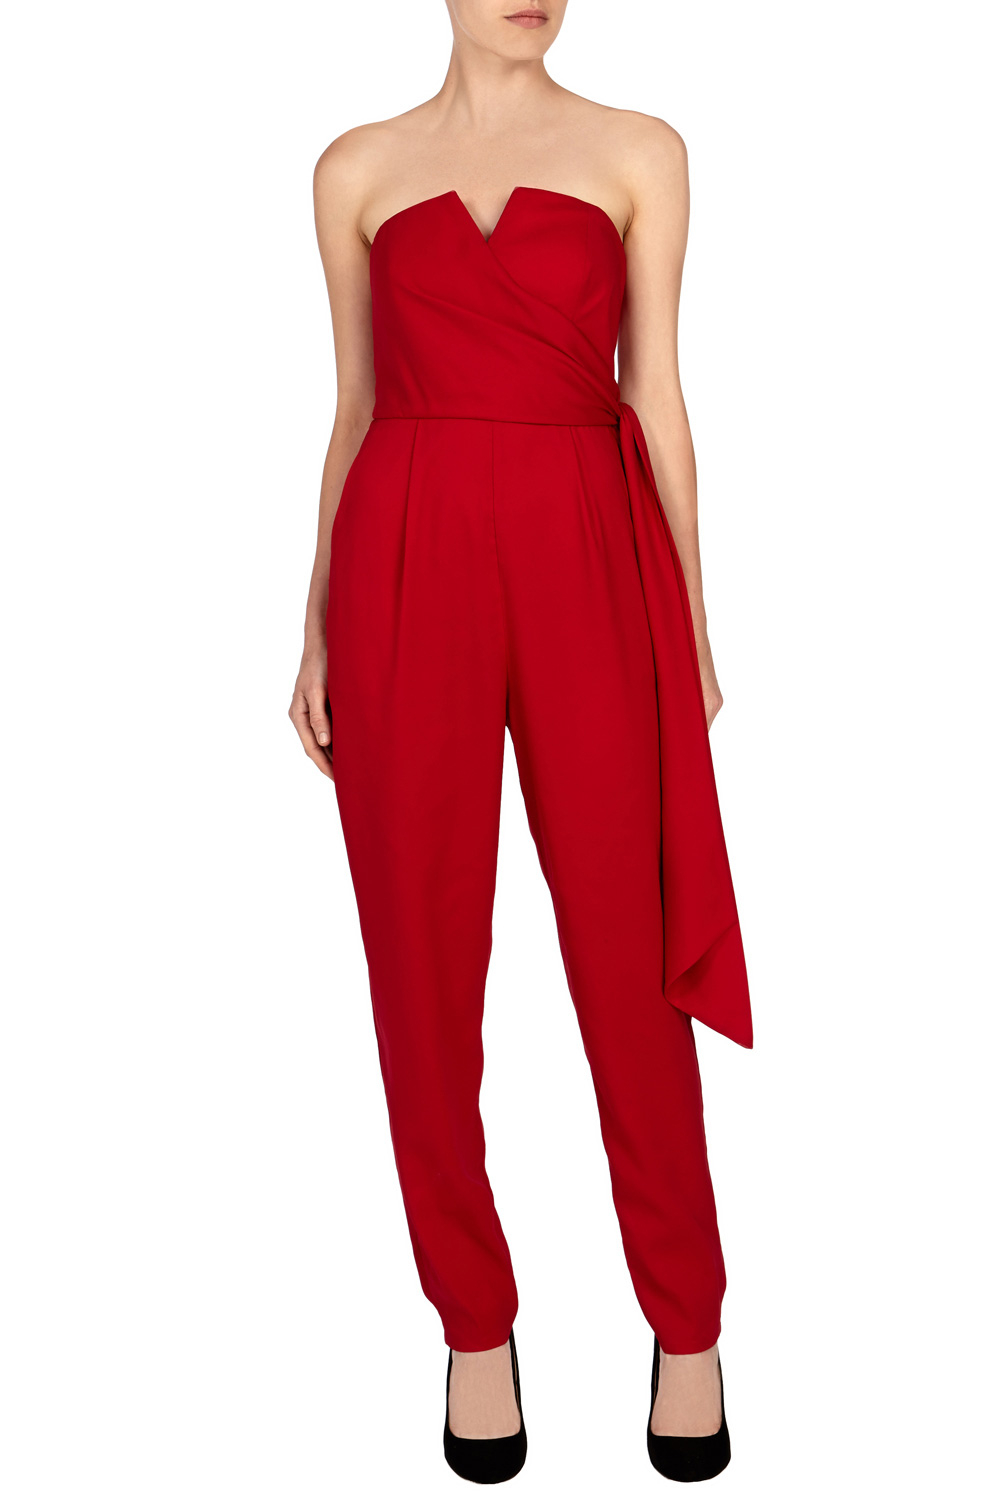 Lyst - Coast Kandis Jumpsuit in Red